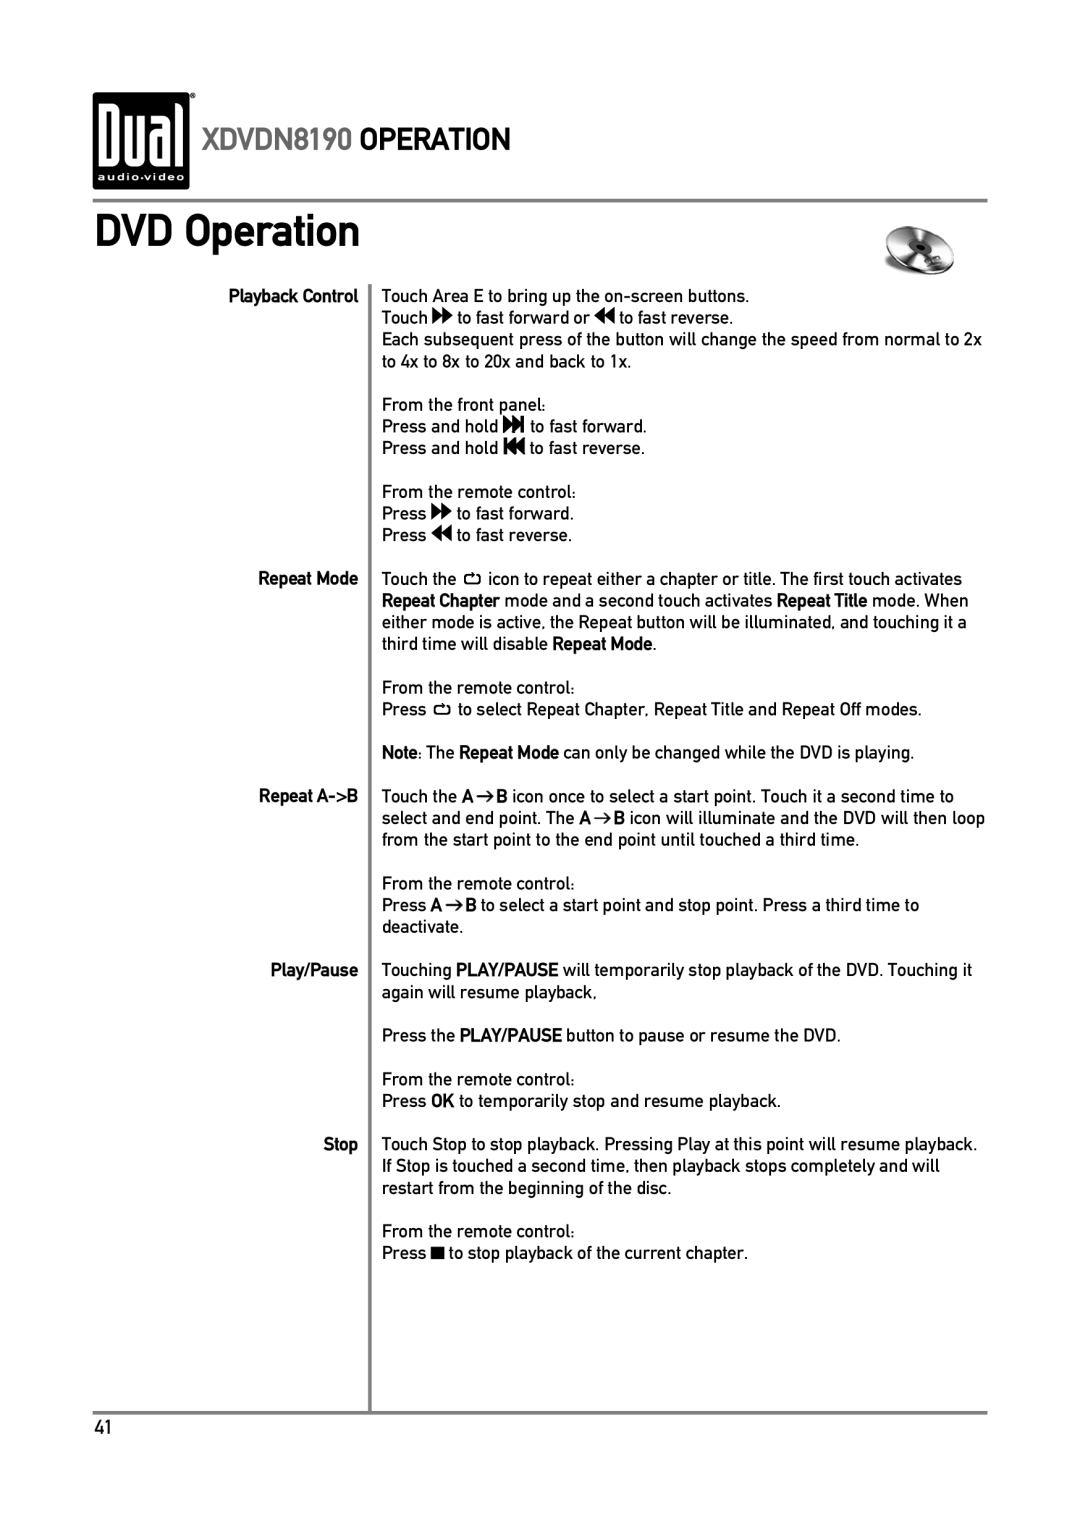 Dual owner manual DVD Operation, XDVDN8190 OPERATION, Playback Control Repeat Mode Repeat A->B, Play/Pause Stop 